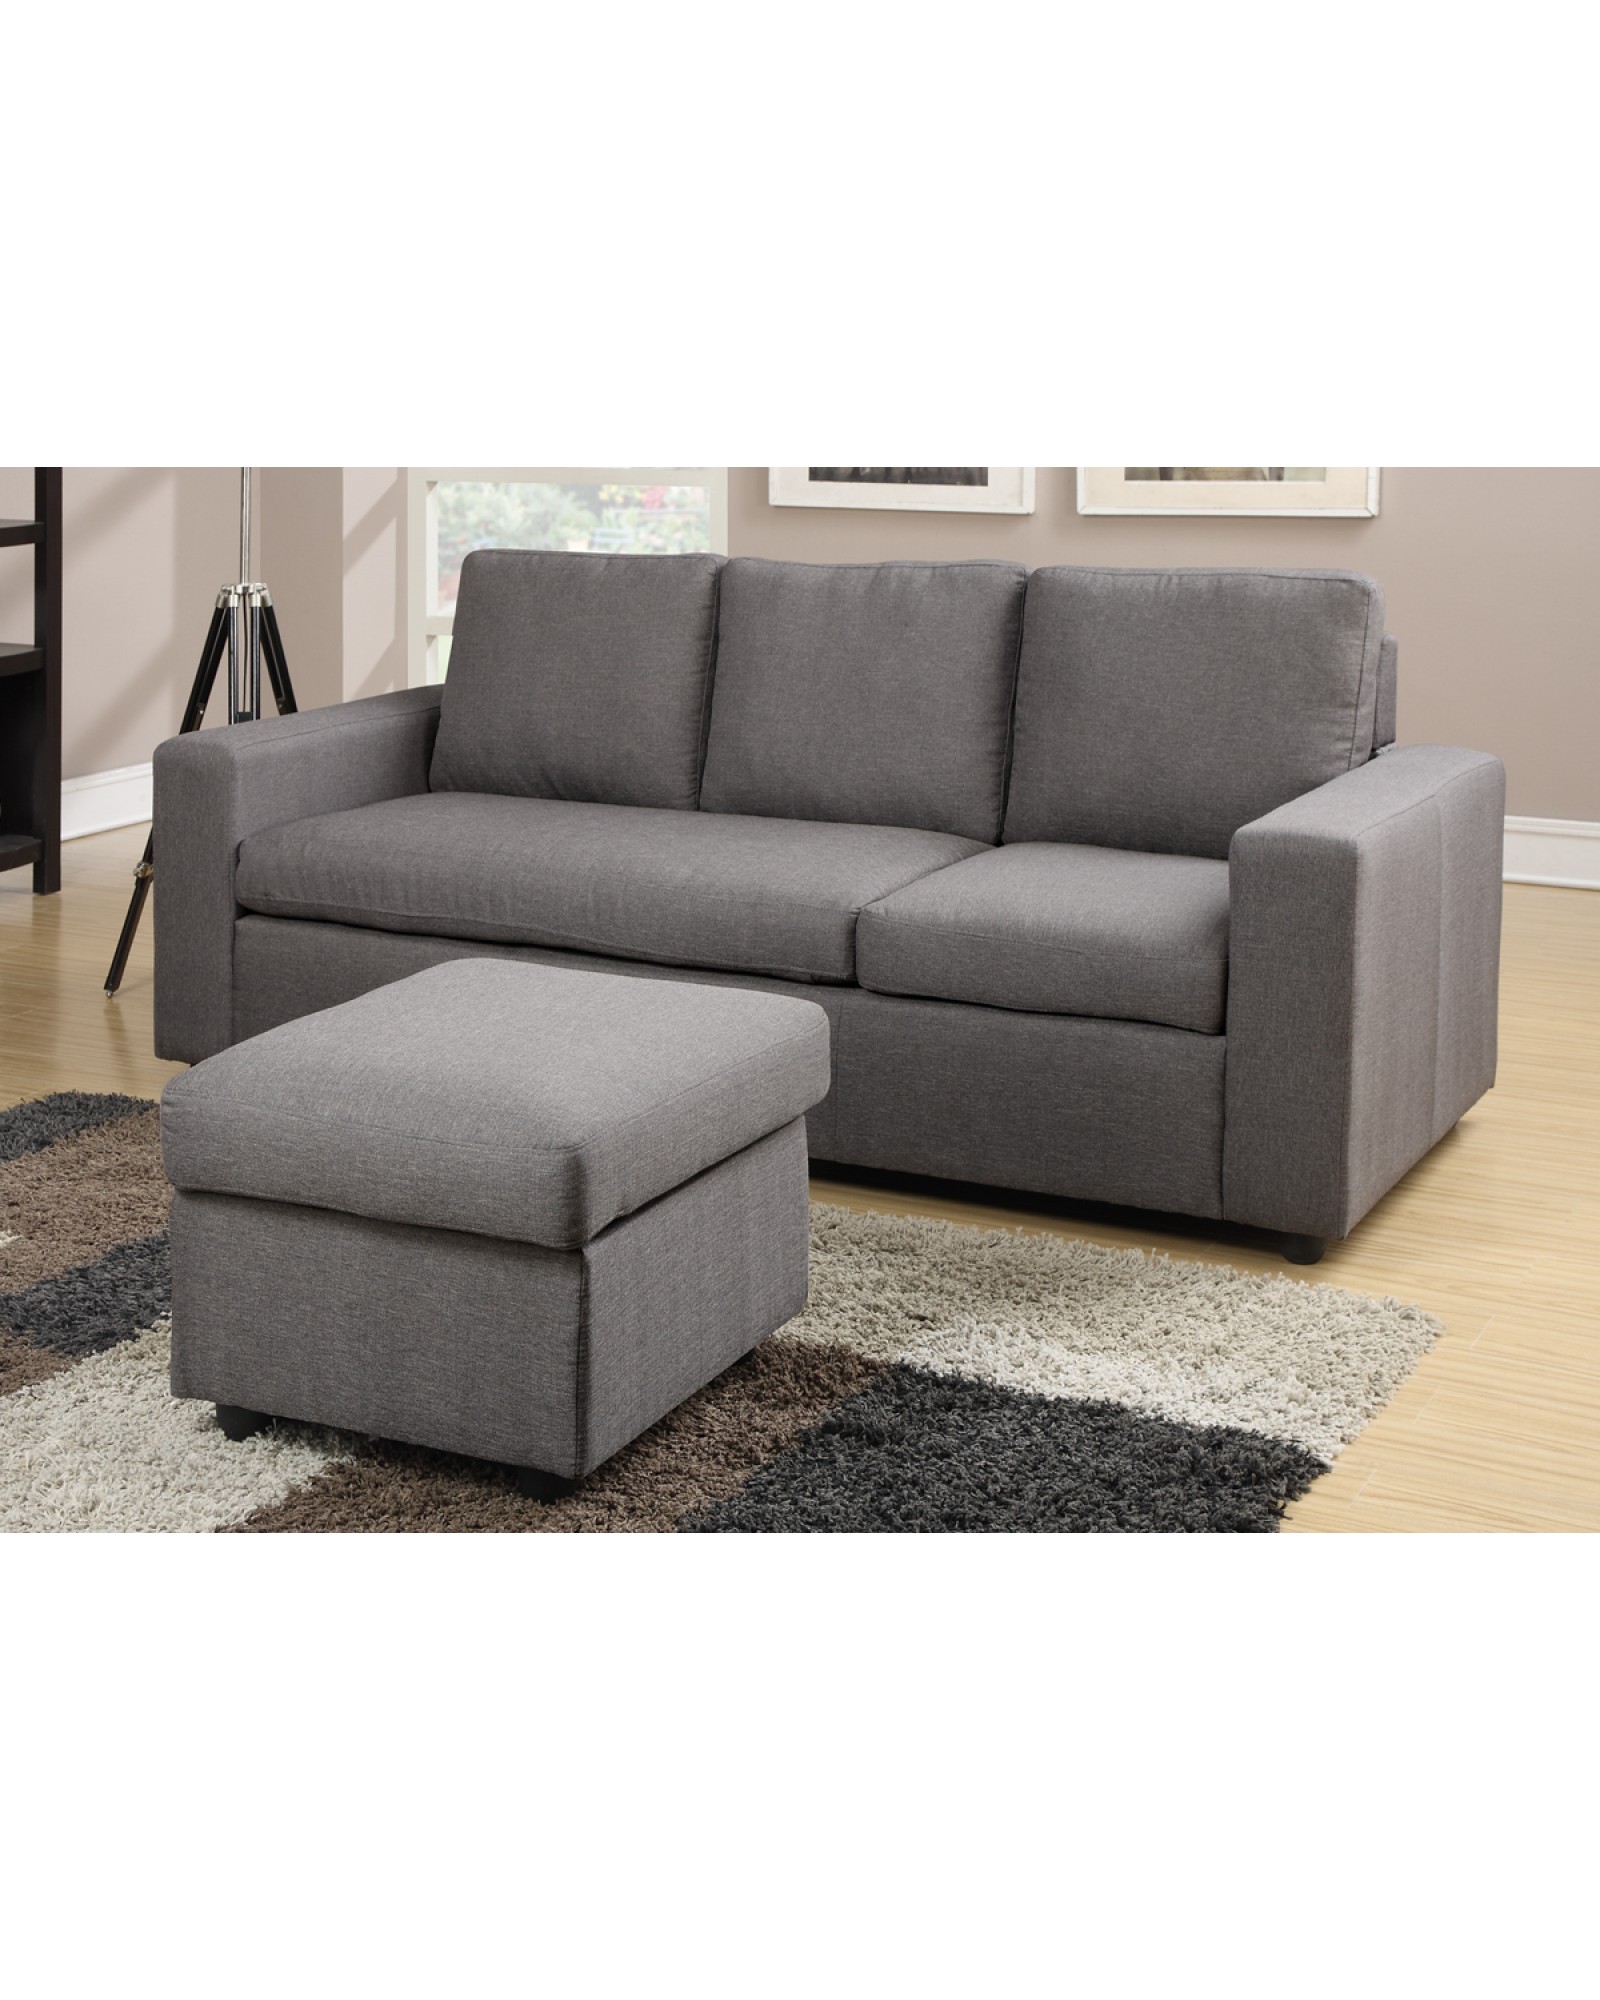 Grey Linen Sectional Sofa by Poundex - F7491